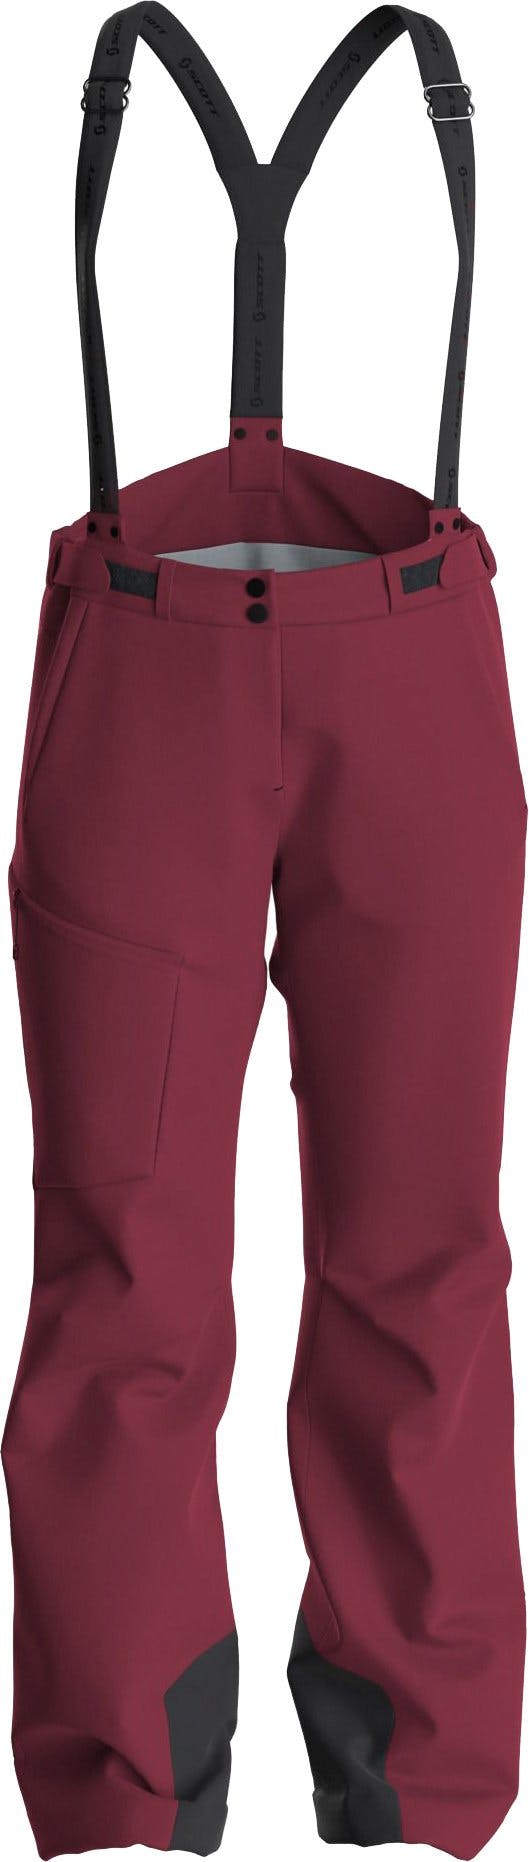 Product image for Explorair 3 Layer Pant - Women's